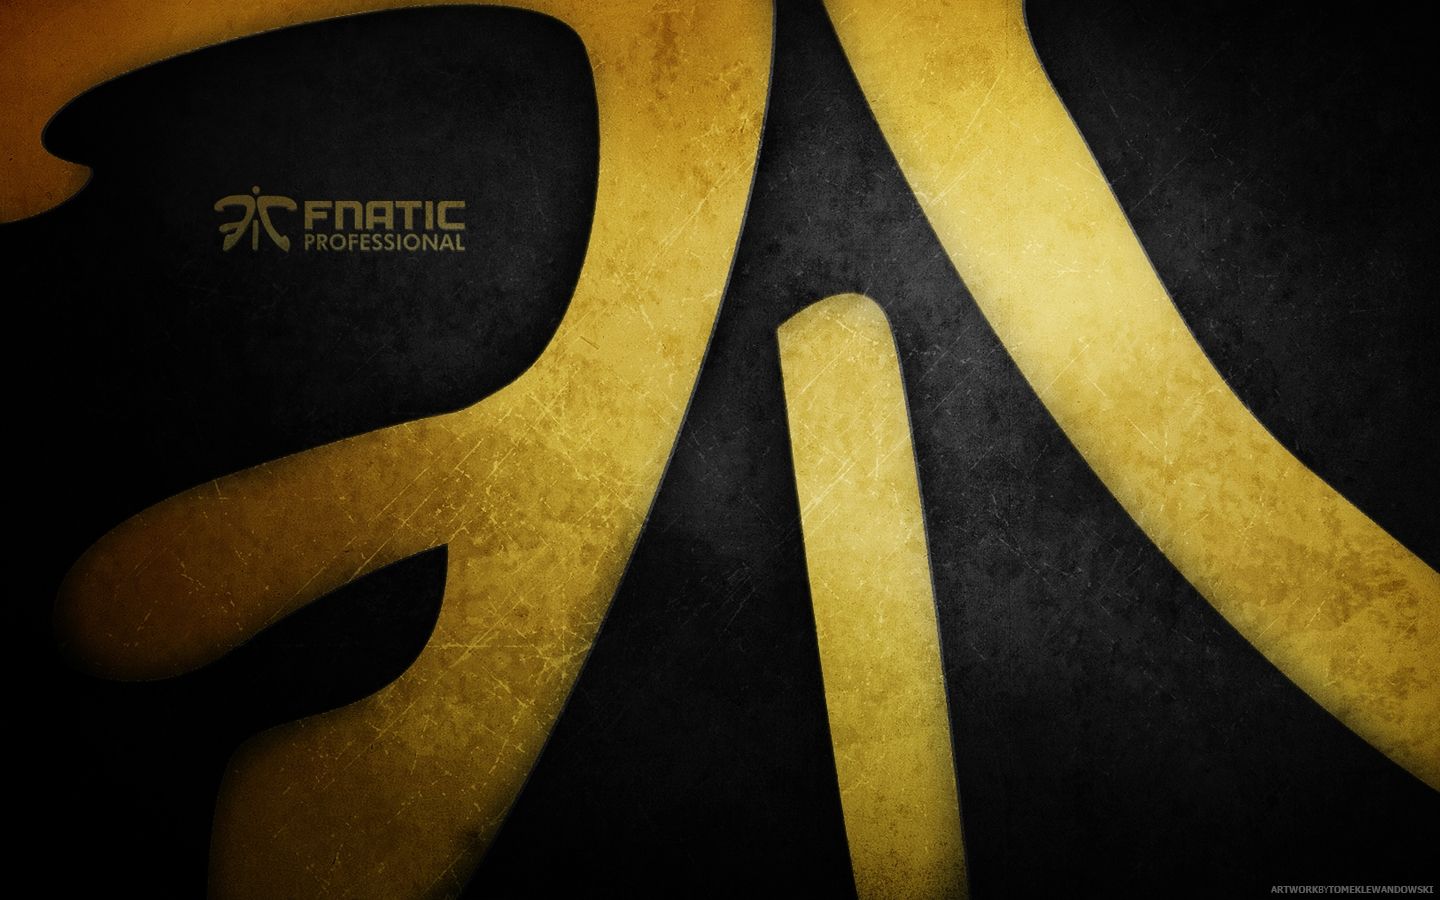 FNATIC.com: Fnatic wallpapers have arrived